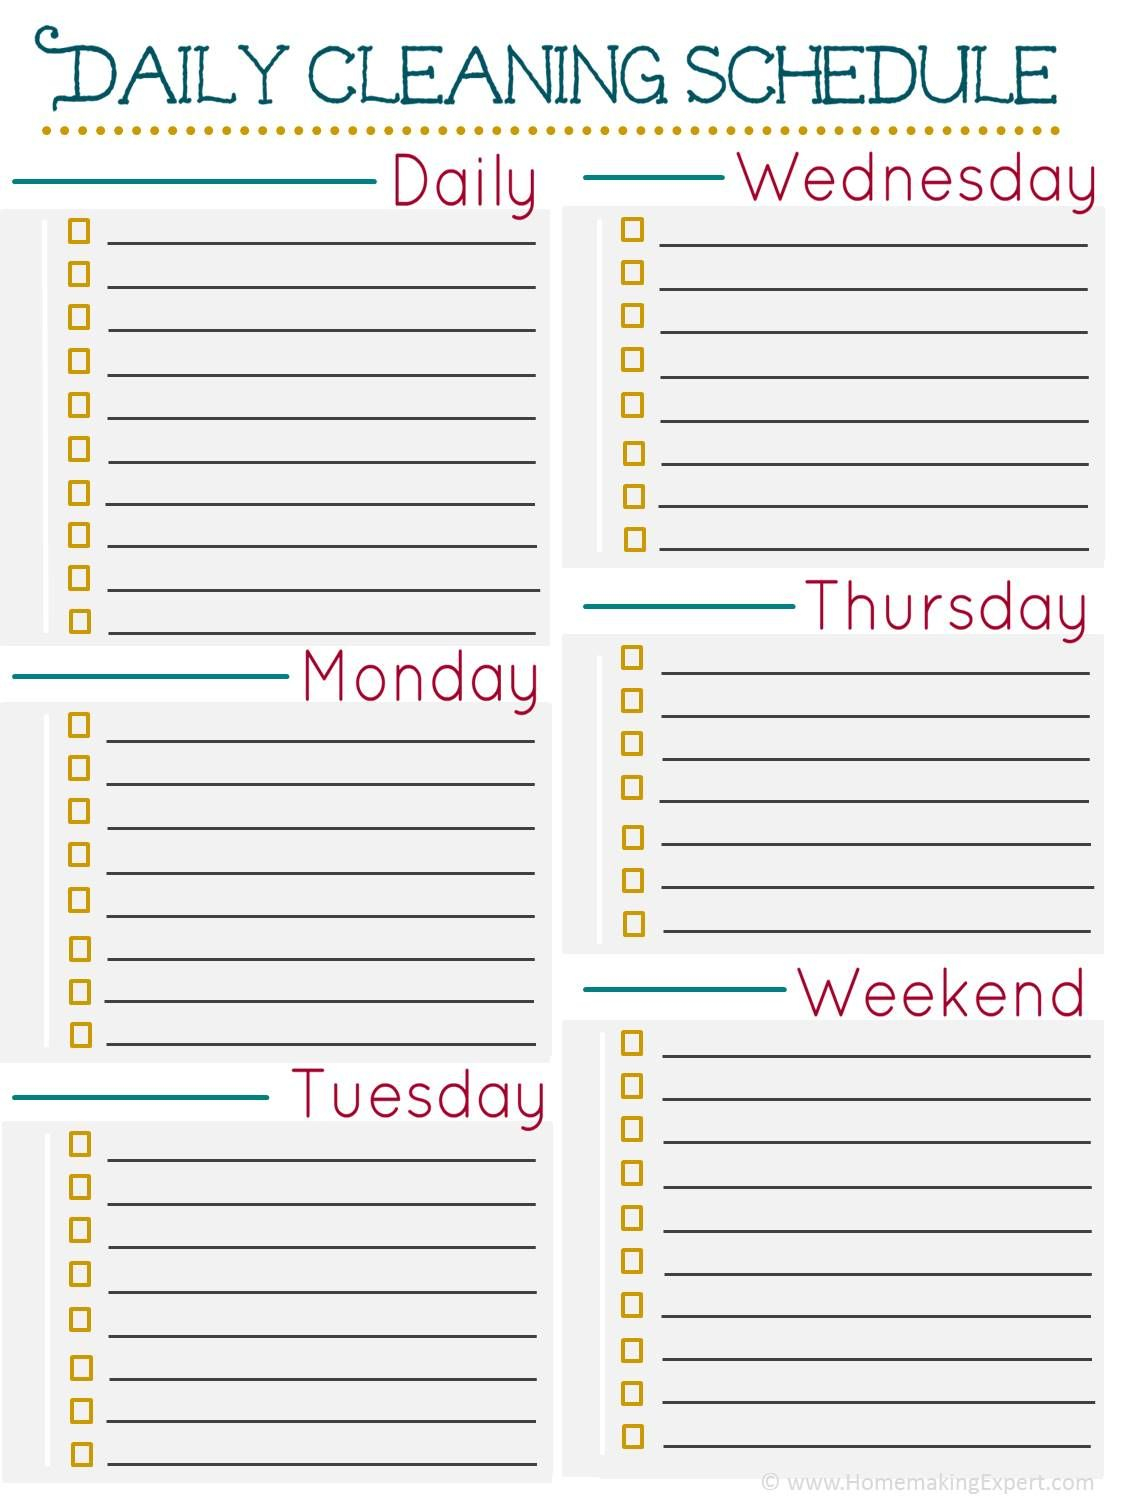 Daily Cleaning Schedule Blank IMAGE Cleaning Schedule 